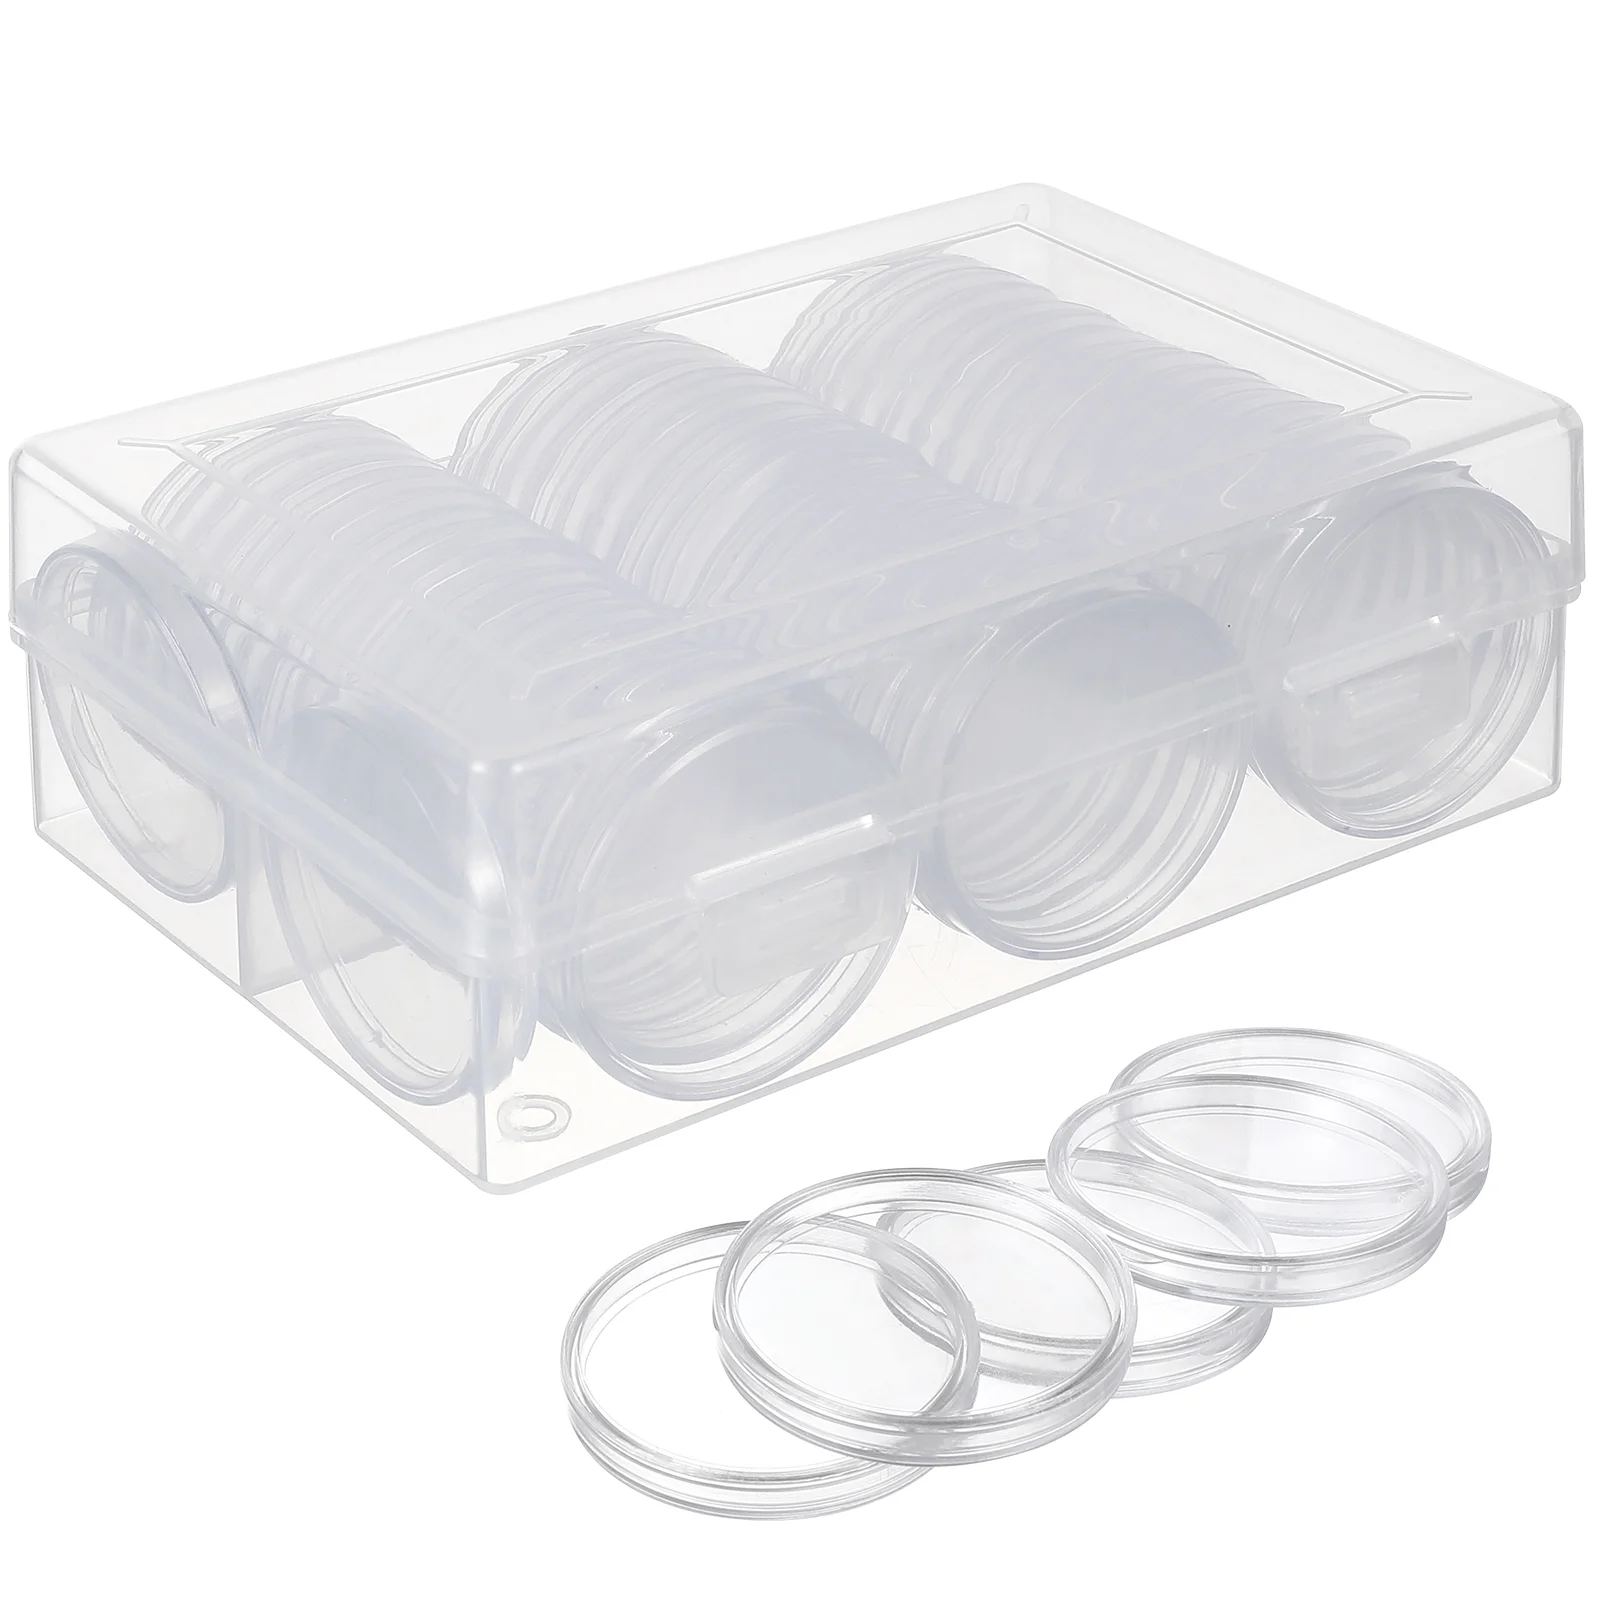 

100 Pcs Commemorative Coin Round Box Storage (40mm Pieces) Coins Case for Collecting Clear Single Plastic Holders Eva